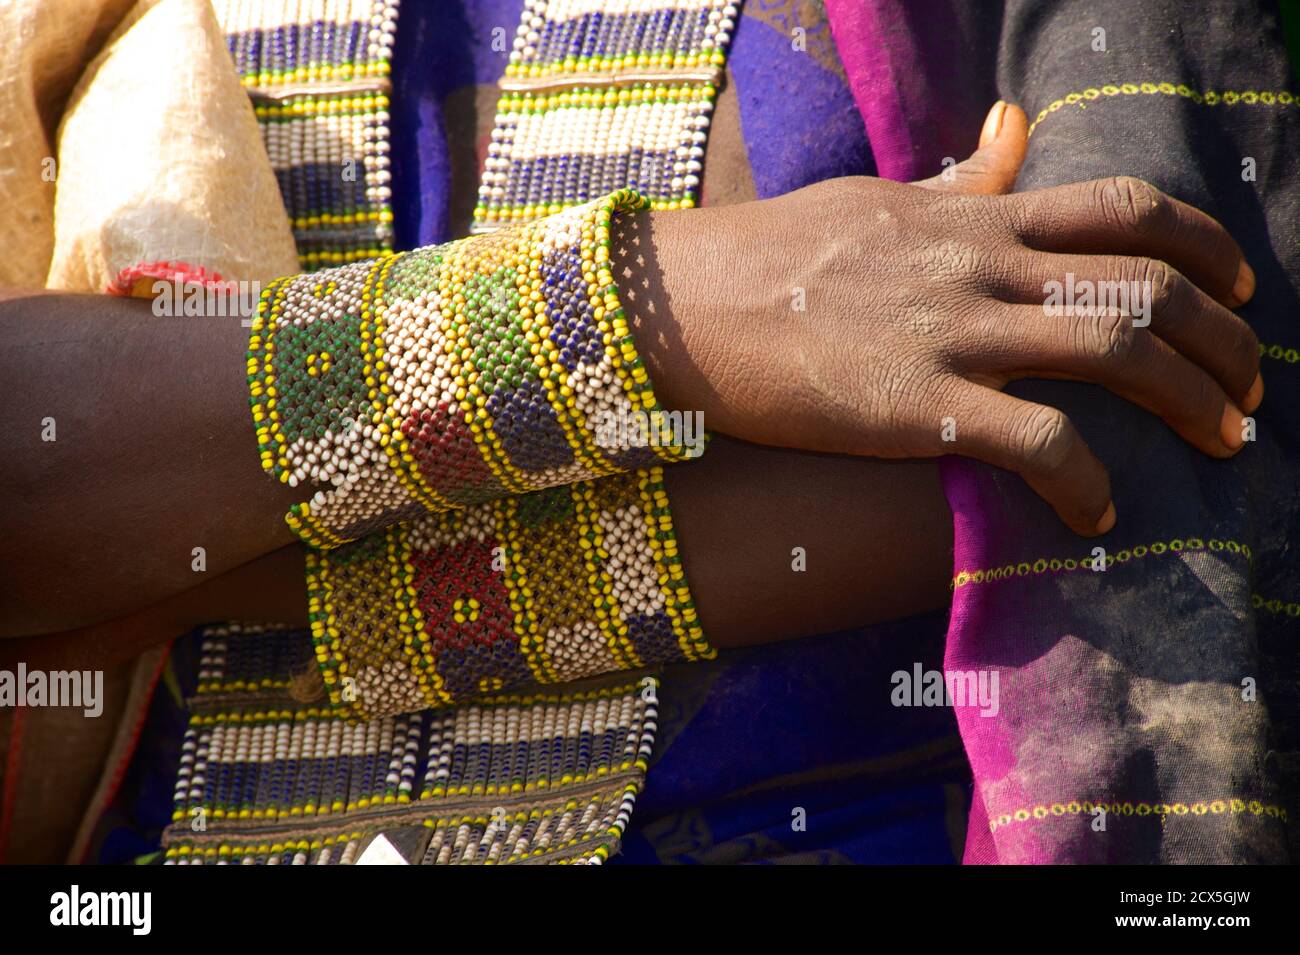 Detail of Afar tribal adornment. Beadwork. Yangudi Rassa National Park, Ethiopia.  This image contains culturally relevant material: Beadwork is deeply set in Afar tribal identity. Stock Photo